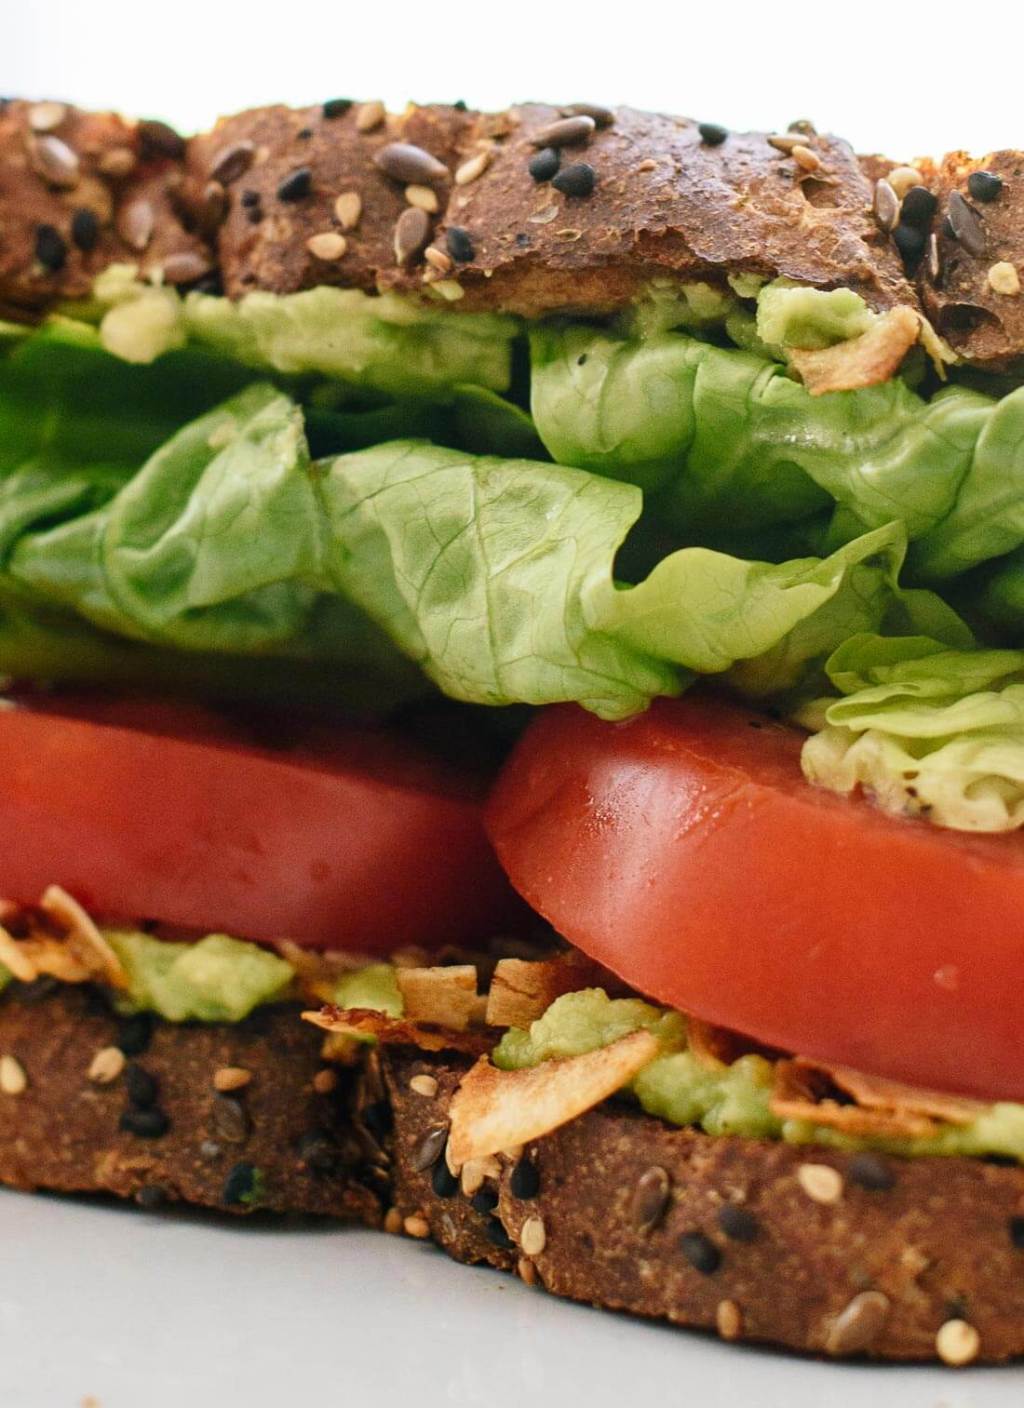 Try this Delicious and Healthy Vegan BLT Sandwich with Tempeh Bacon!